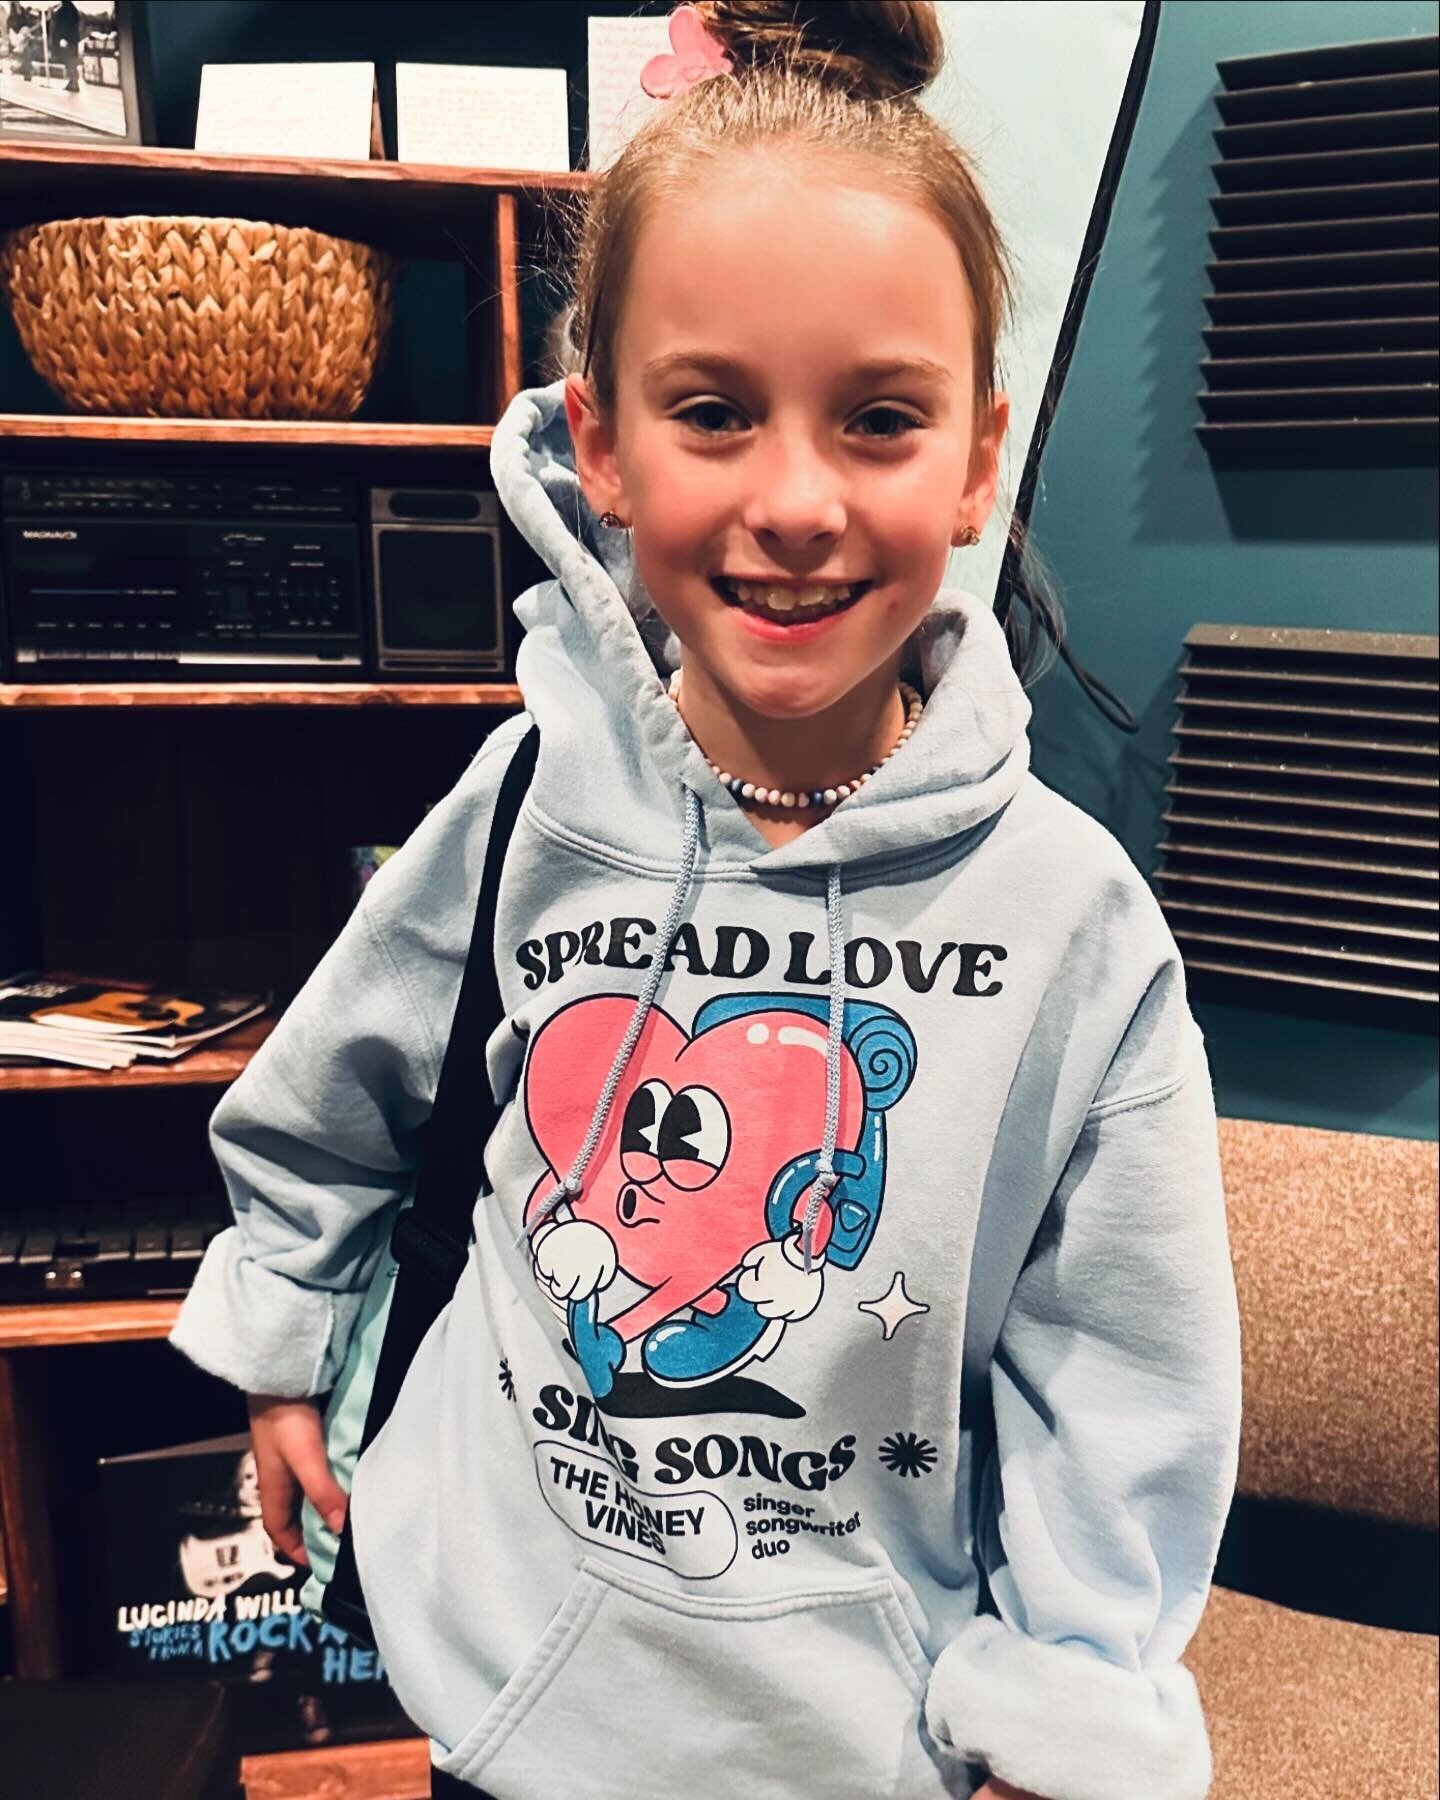 Check out this rockstar in her new Honey Vines threads at her guitar lesson today! We love it, sweet friend. You SHINE and we can&rsquo;t wait to see where your music takes you 🫶🏼🎶